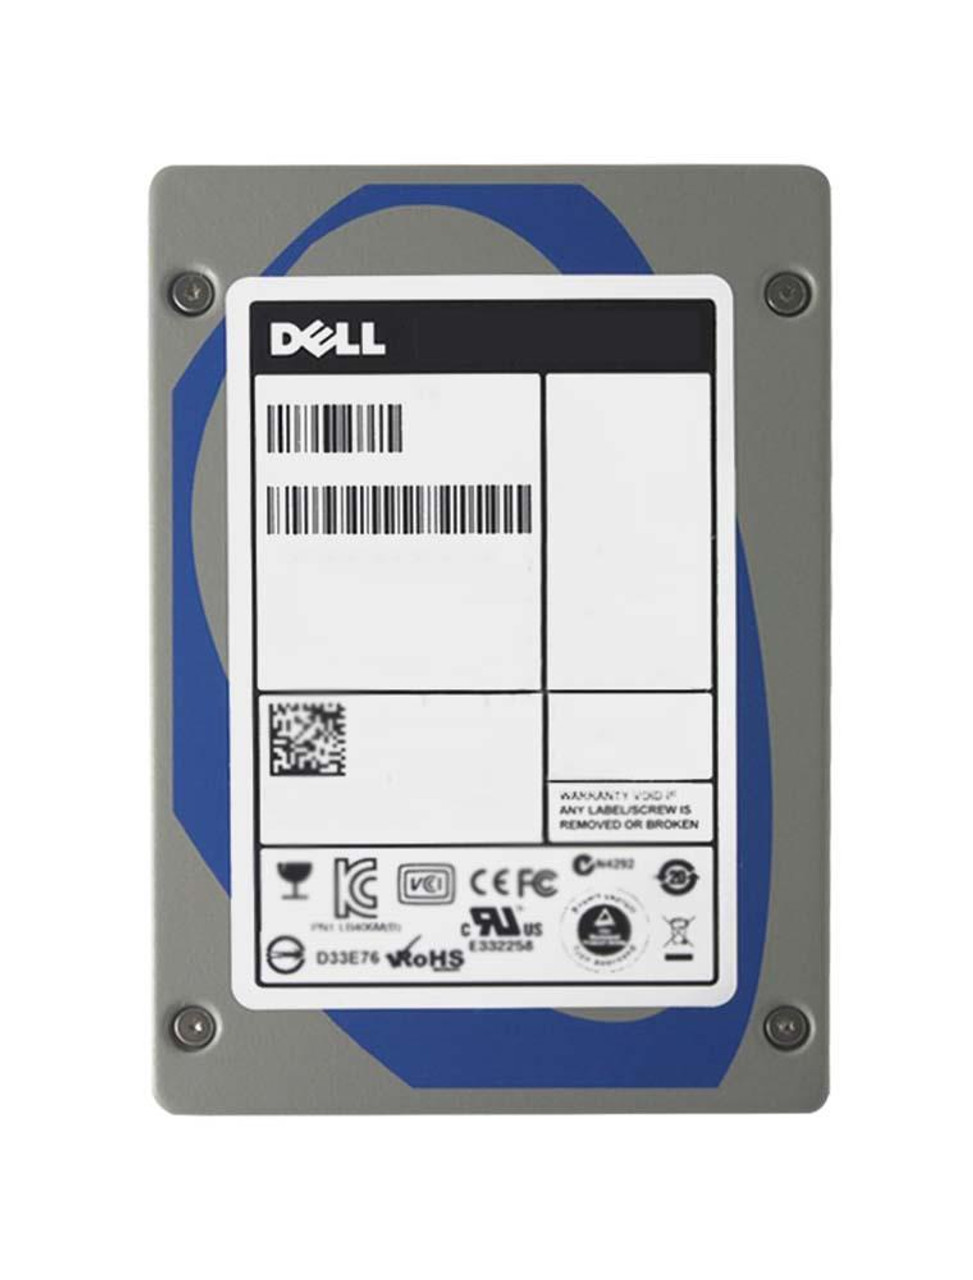 53W94 Dell 100GB MLC SATA 3Gbps Hot Swap 2.5-inch Internal Solid State Drive (SSD)